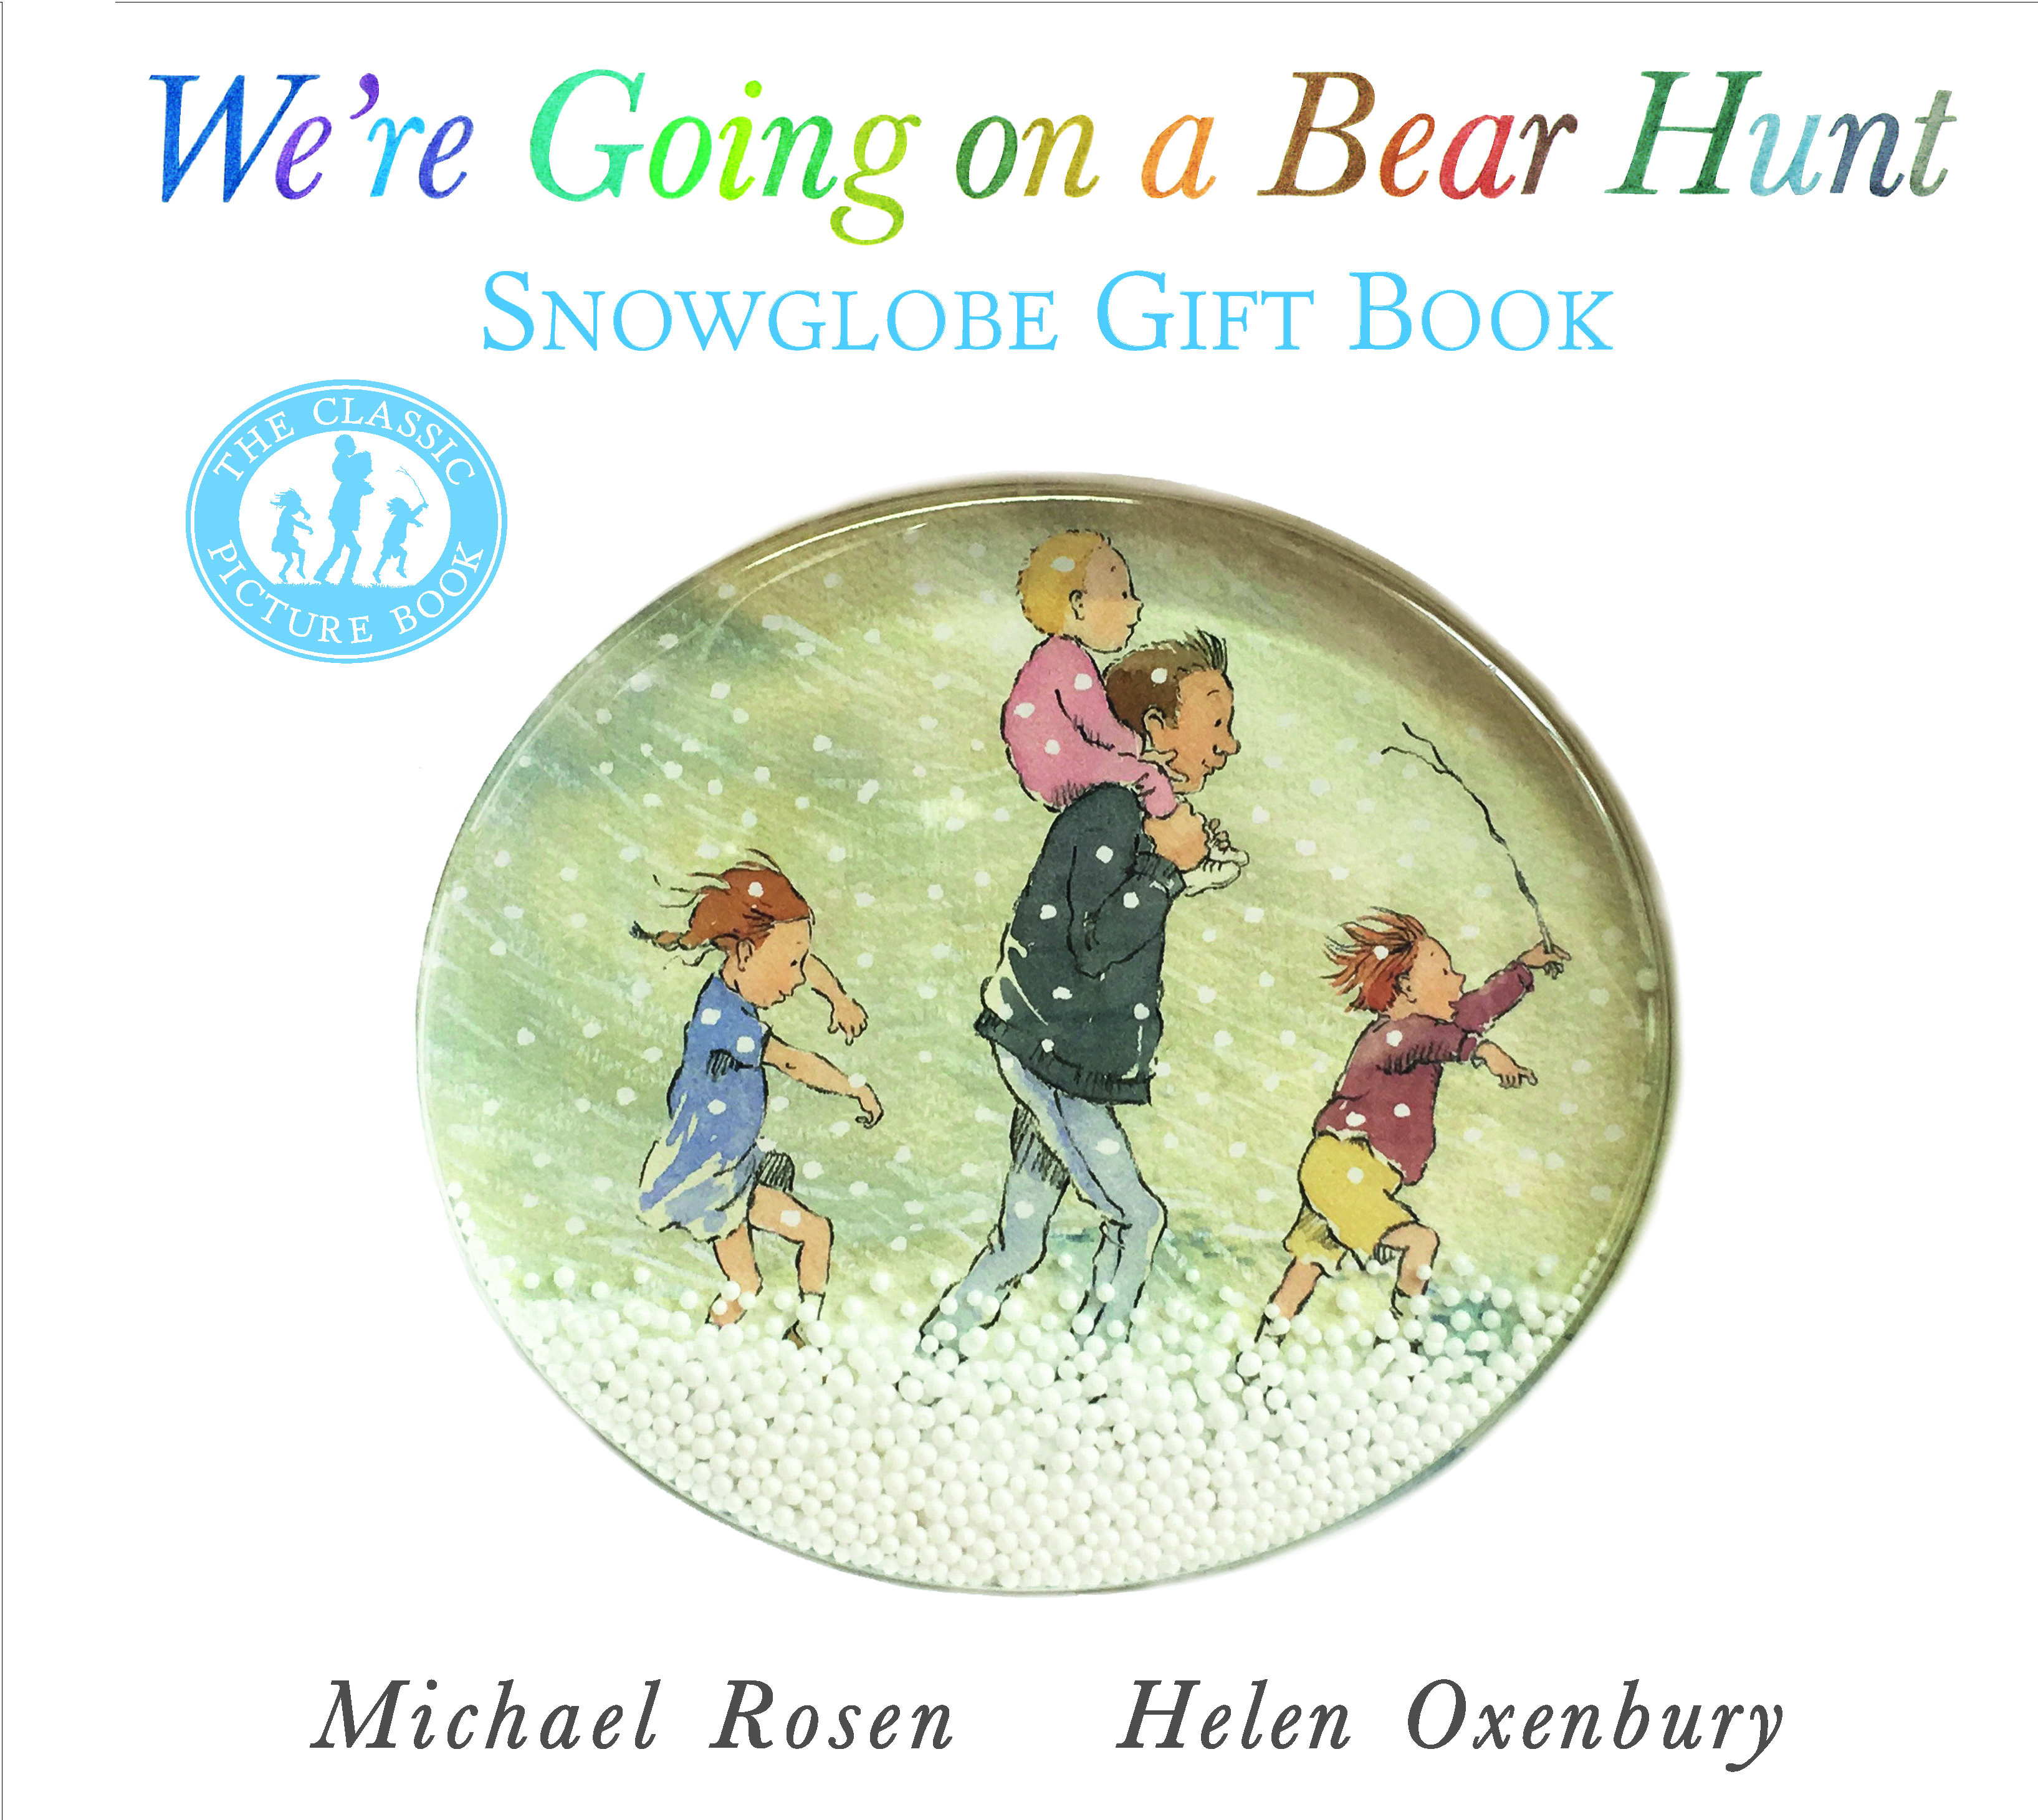 We-re-Going-on-a-Bear-Hunt-Snowglobe-Gift-Book